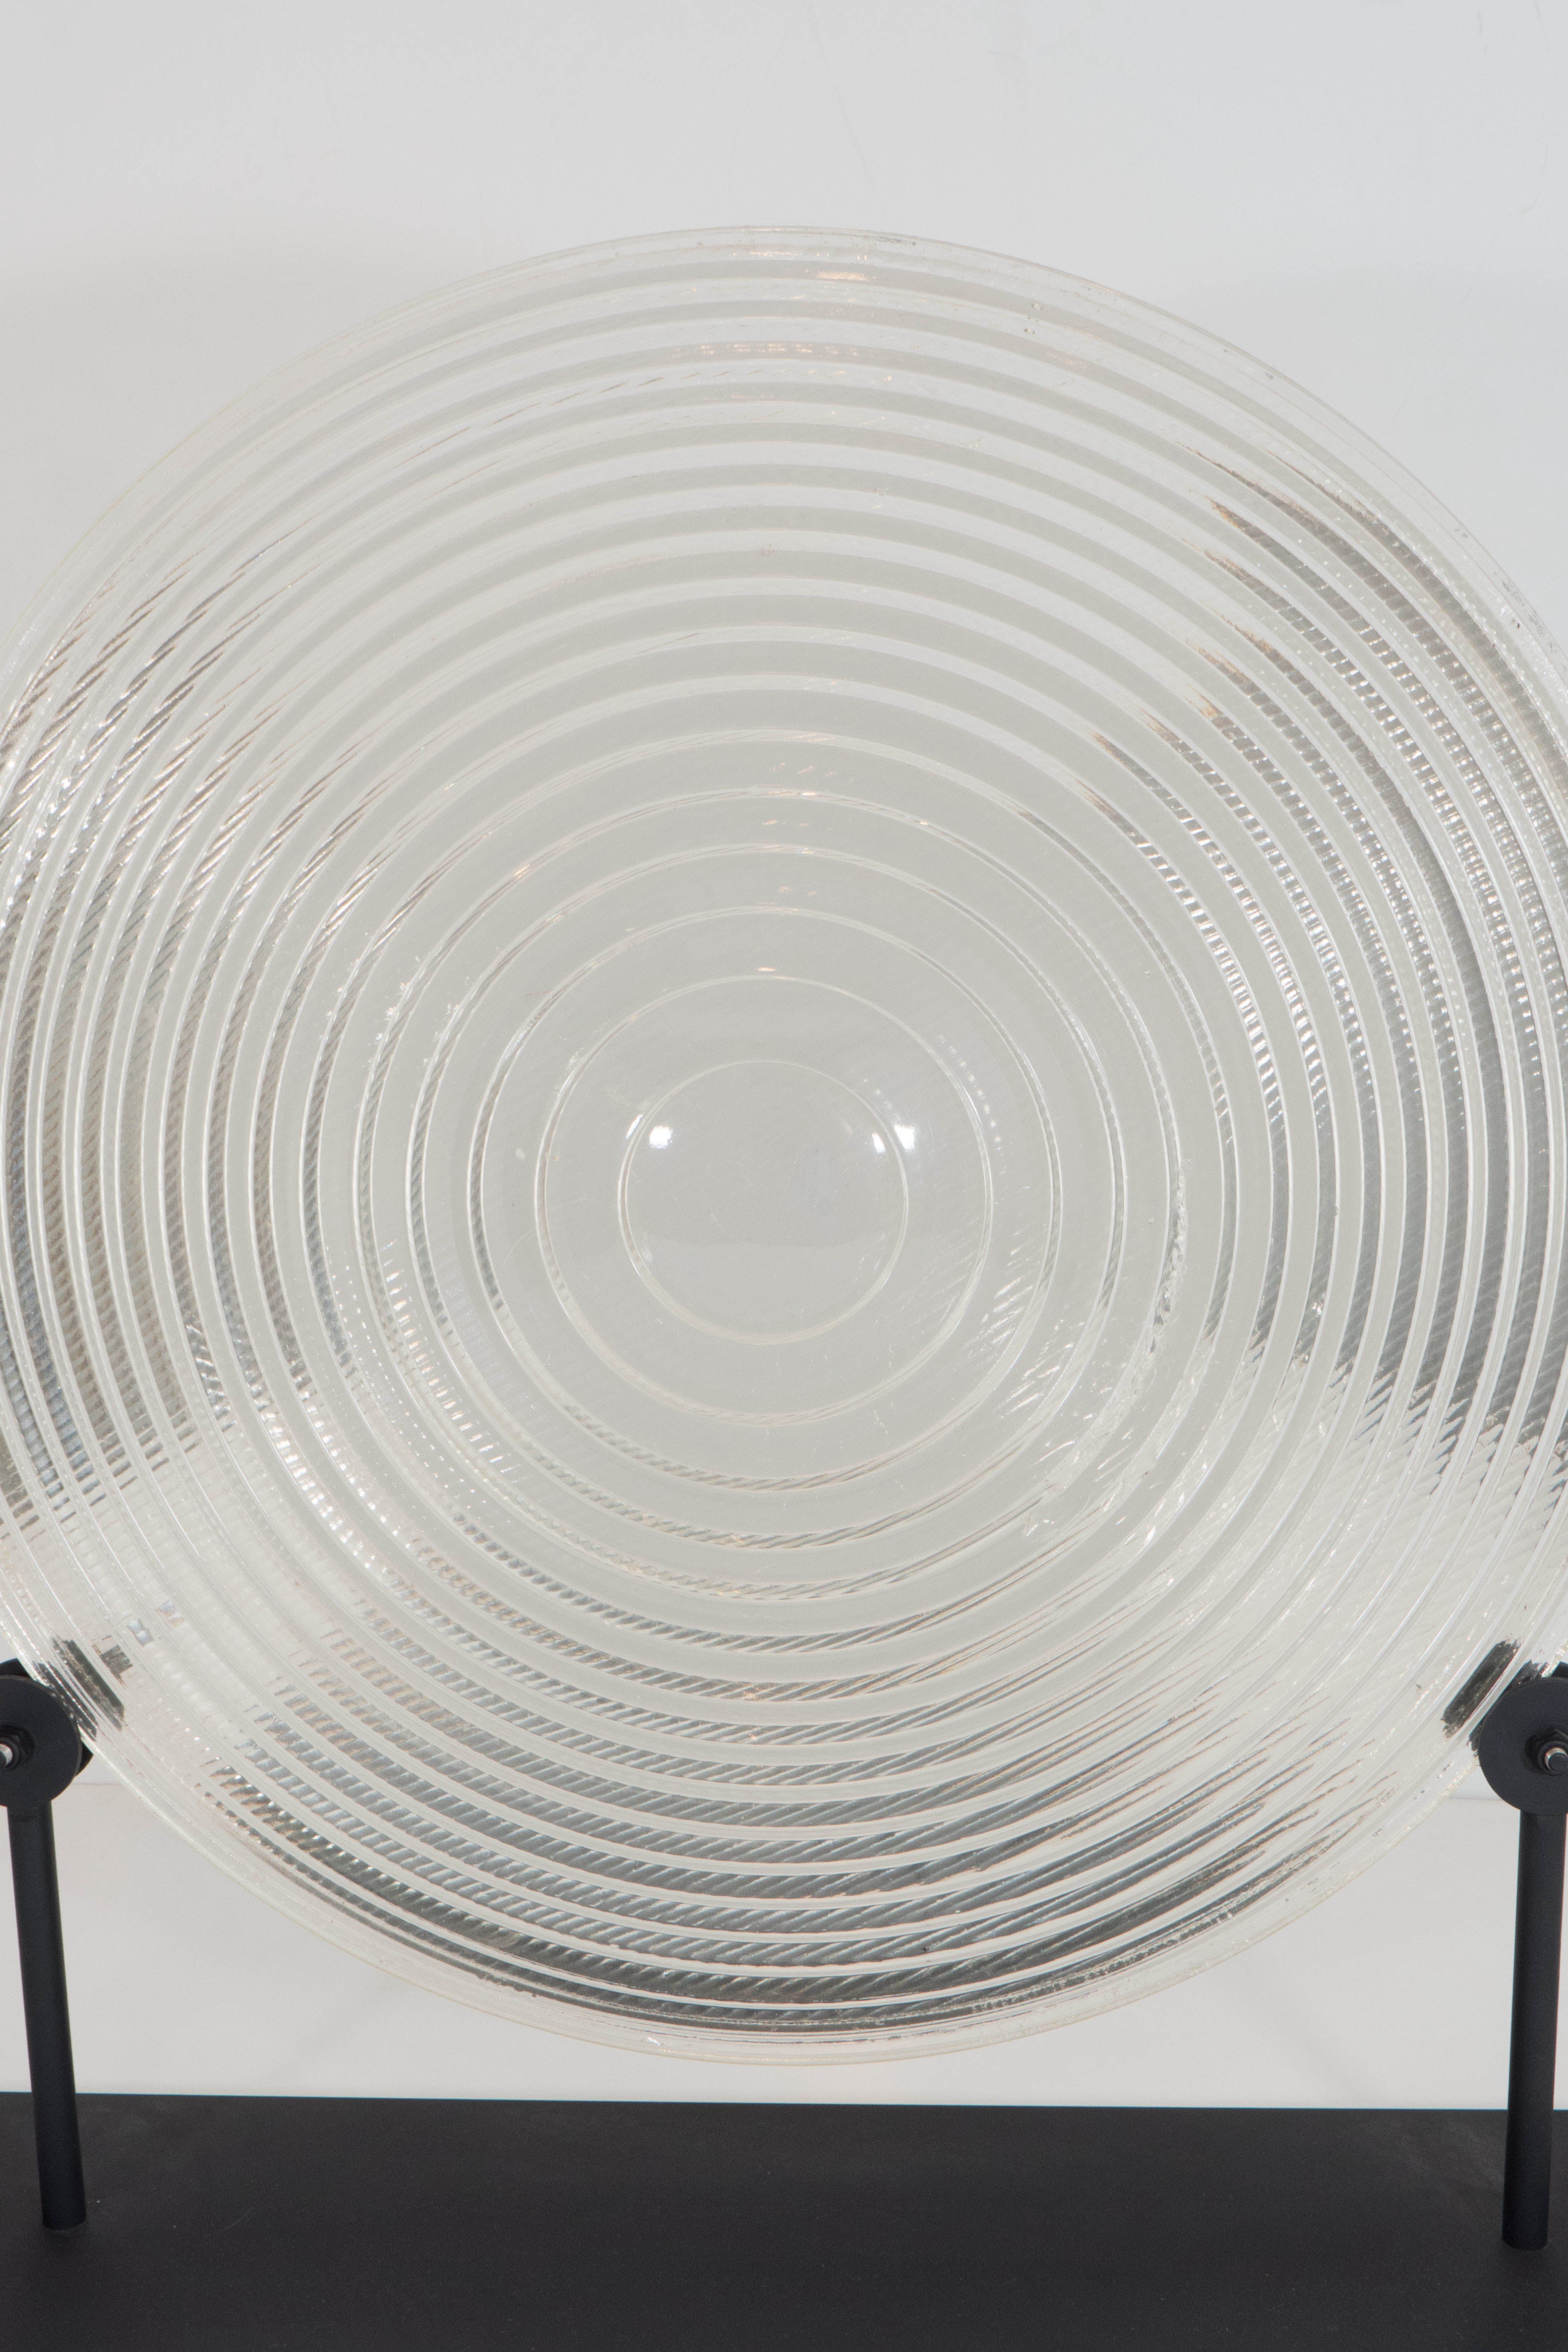 20th Century Round Optical Fresnel Lens in Borosilicate Glass on Display Stand